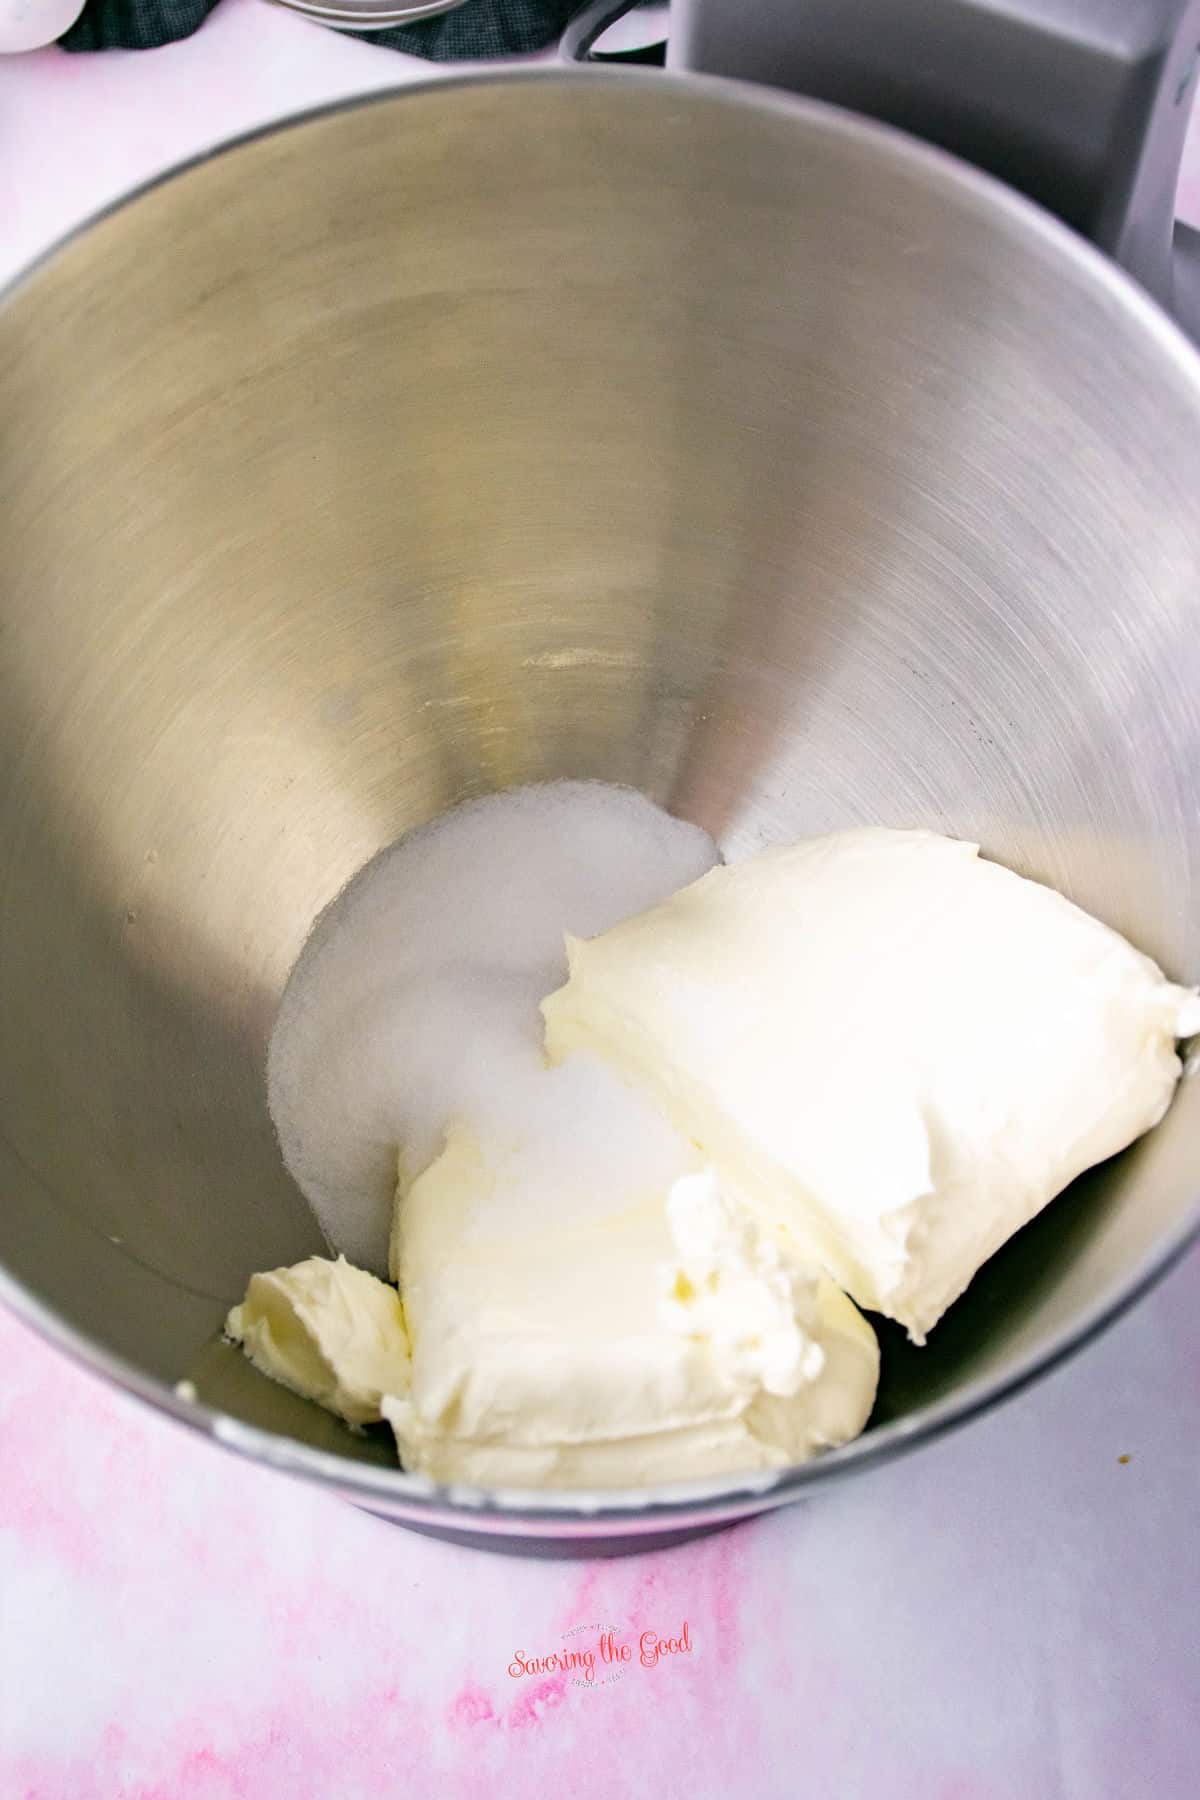 cream cheese and sugar in a mixing bowl.